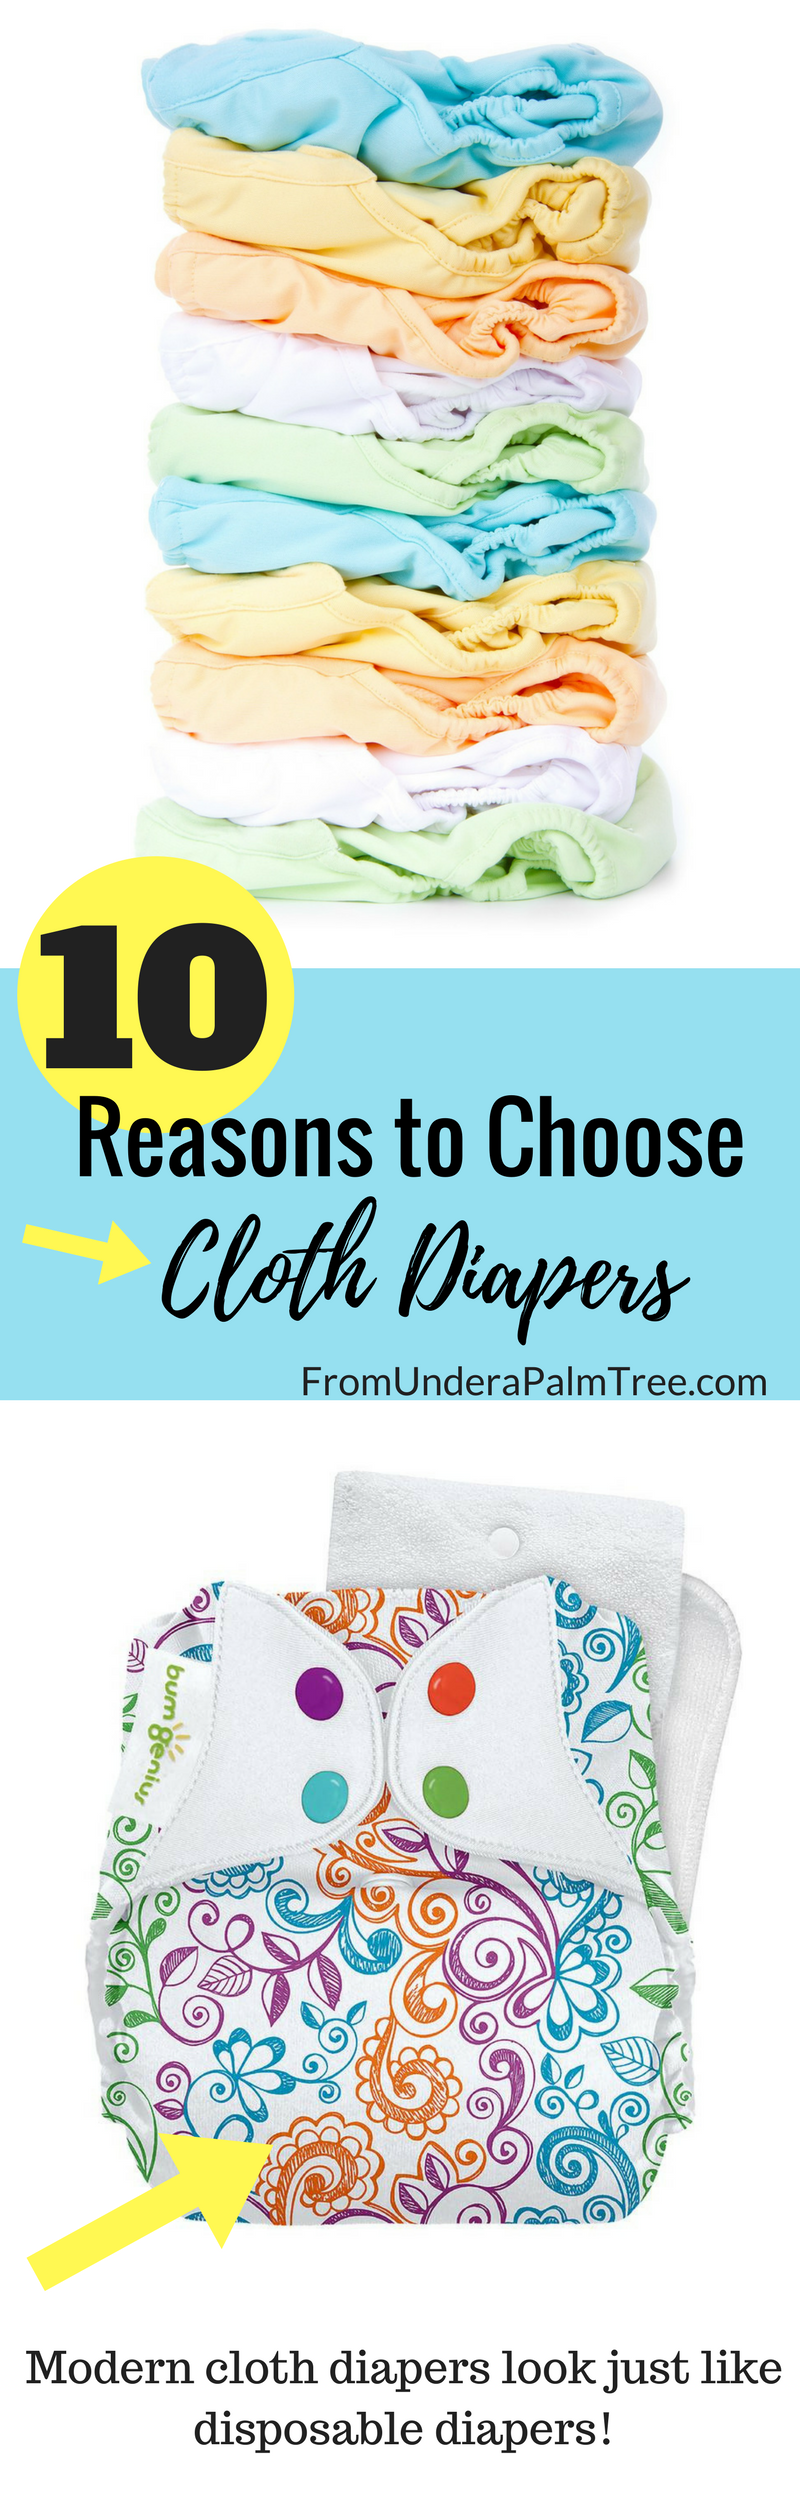 10 Reasons to Choose Cloth Diapers | cloth diapers | cloth diapering | cloth diapering essentials | how to cloth diaper | how much money can I save cloth diapering | best cloth diapers | how to wash cloth diapers | what kind of cloth diapers to choose | why should I use cloth diapers | why should I cloth diaper my child | why should I cloth diaper | cloth diapers vs disposable diapers | how much better are cloth diapers for the environment | affect of disposable diapers on the environment |